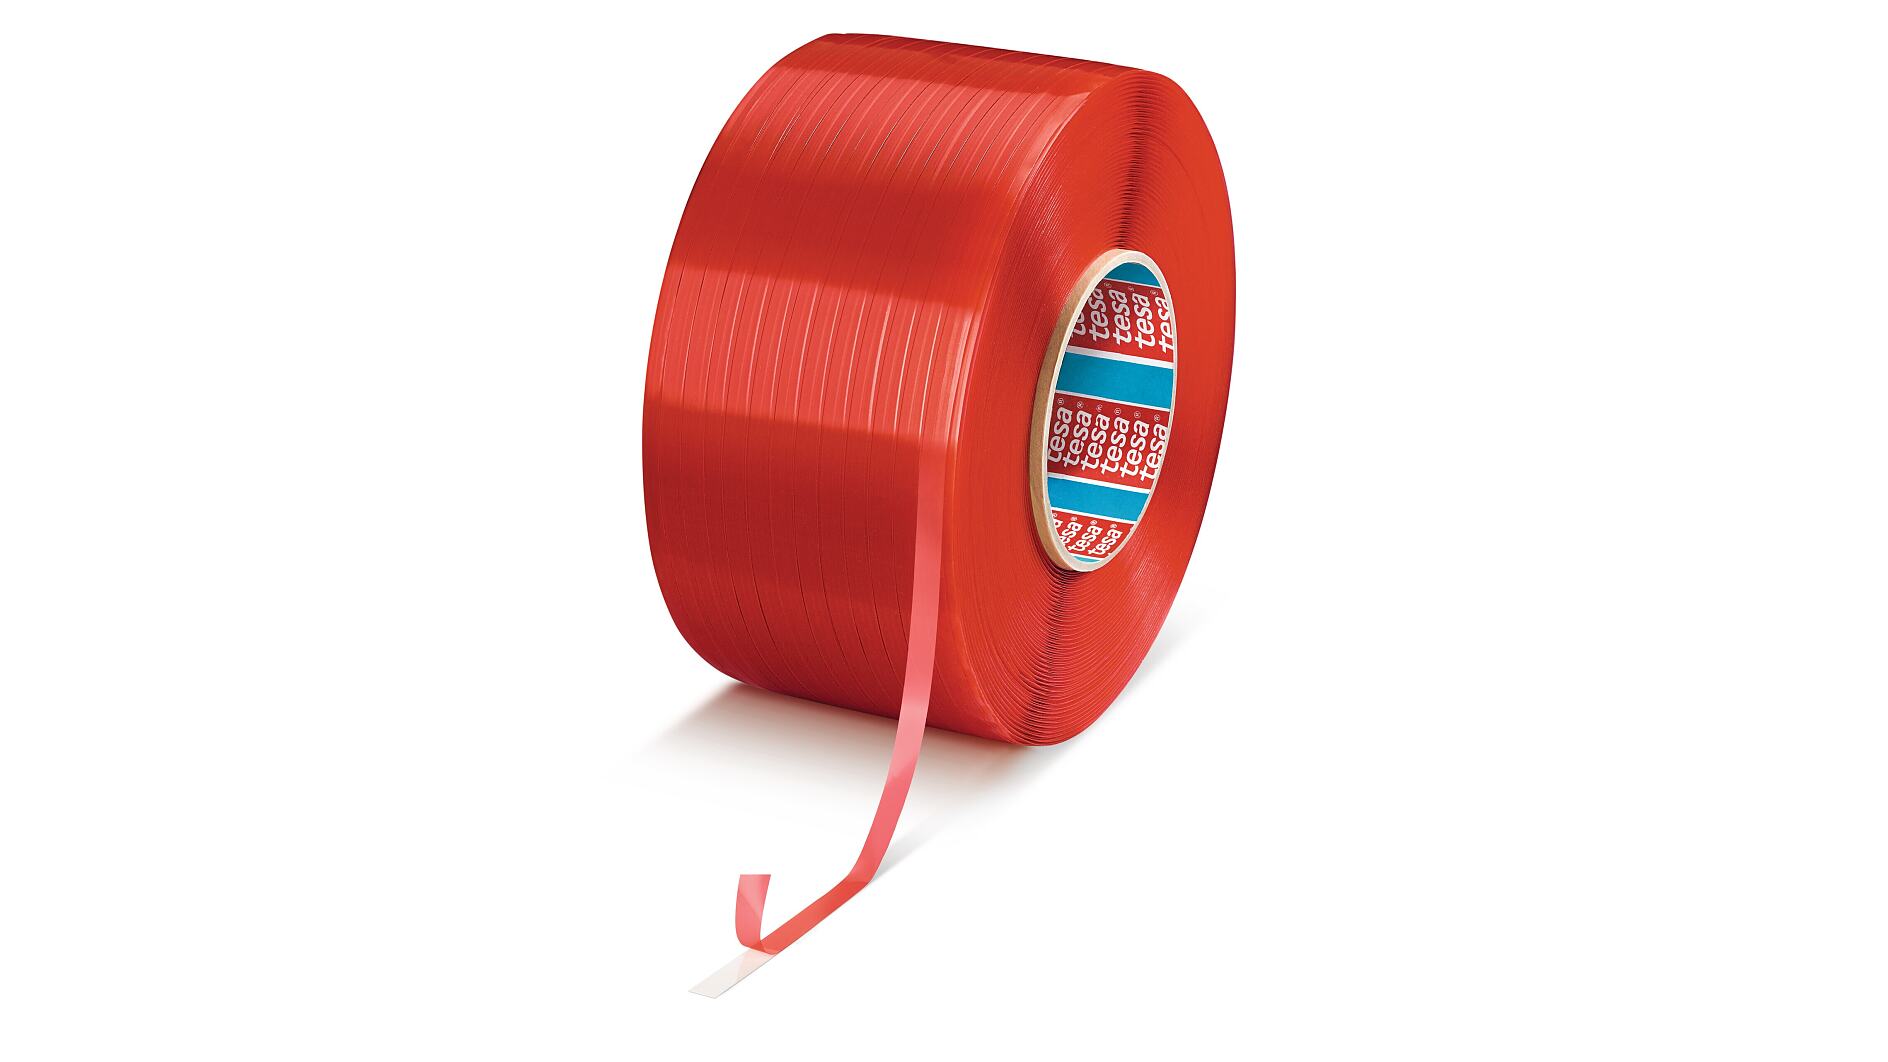 Tesa 4970 Double-Coated Mounting Tape - Industrial Tape Online Store